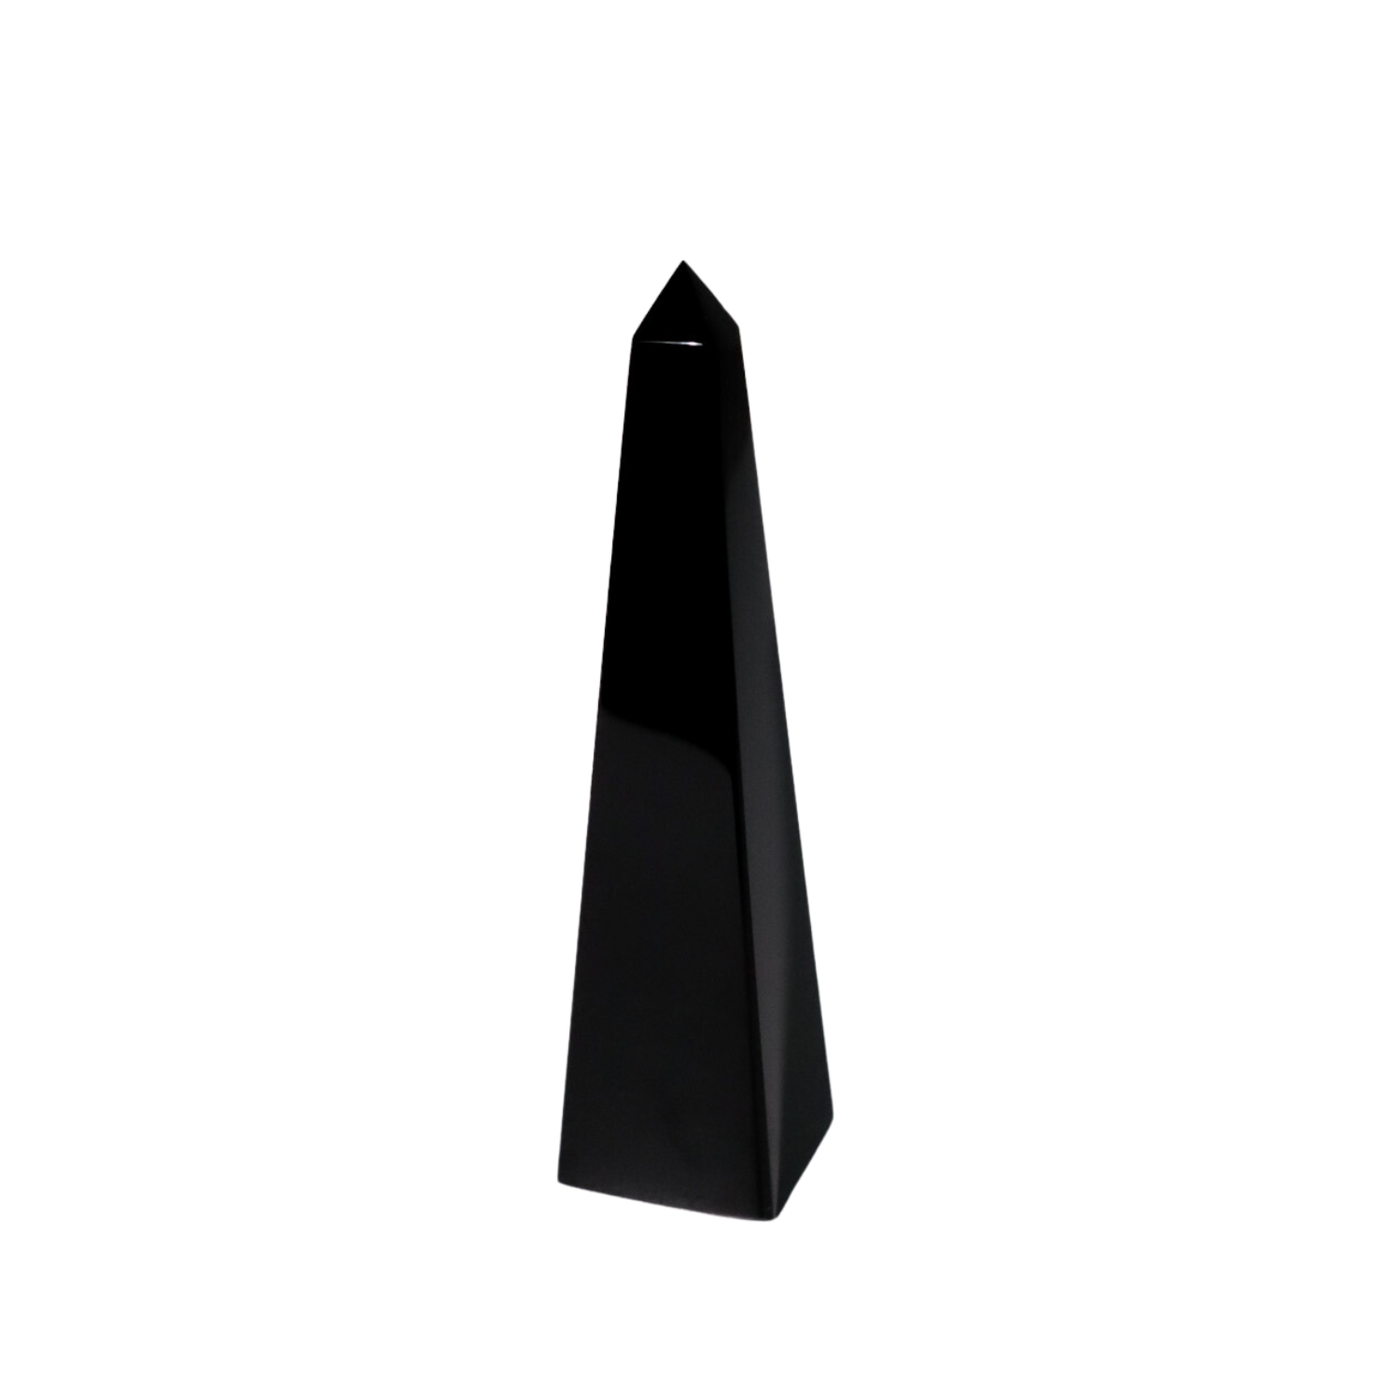 Product view of genuine Black Obsidian obelisk point crystal by Energy Muse